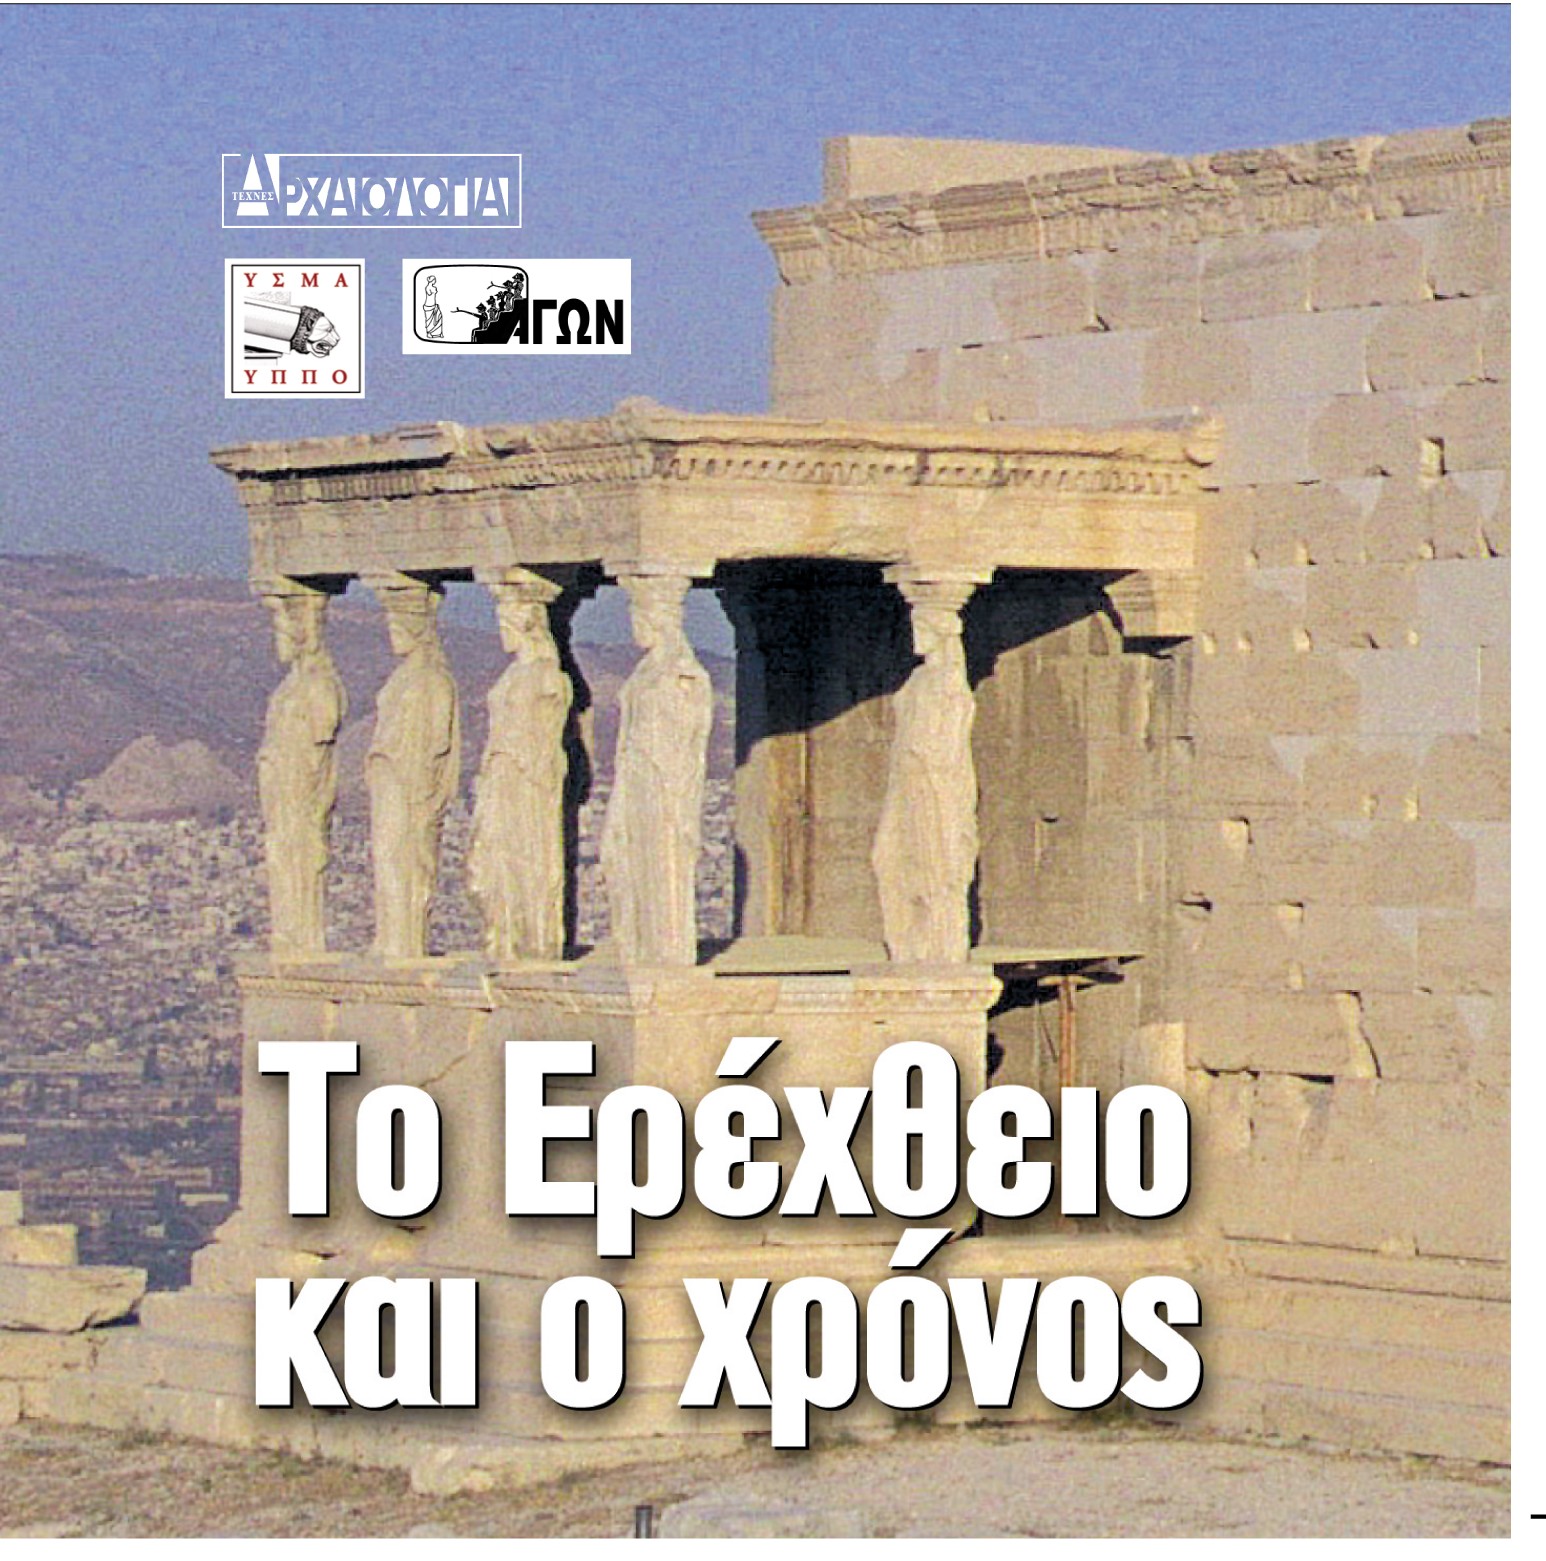 The Erechteion and time